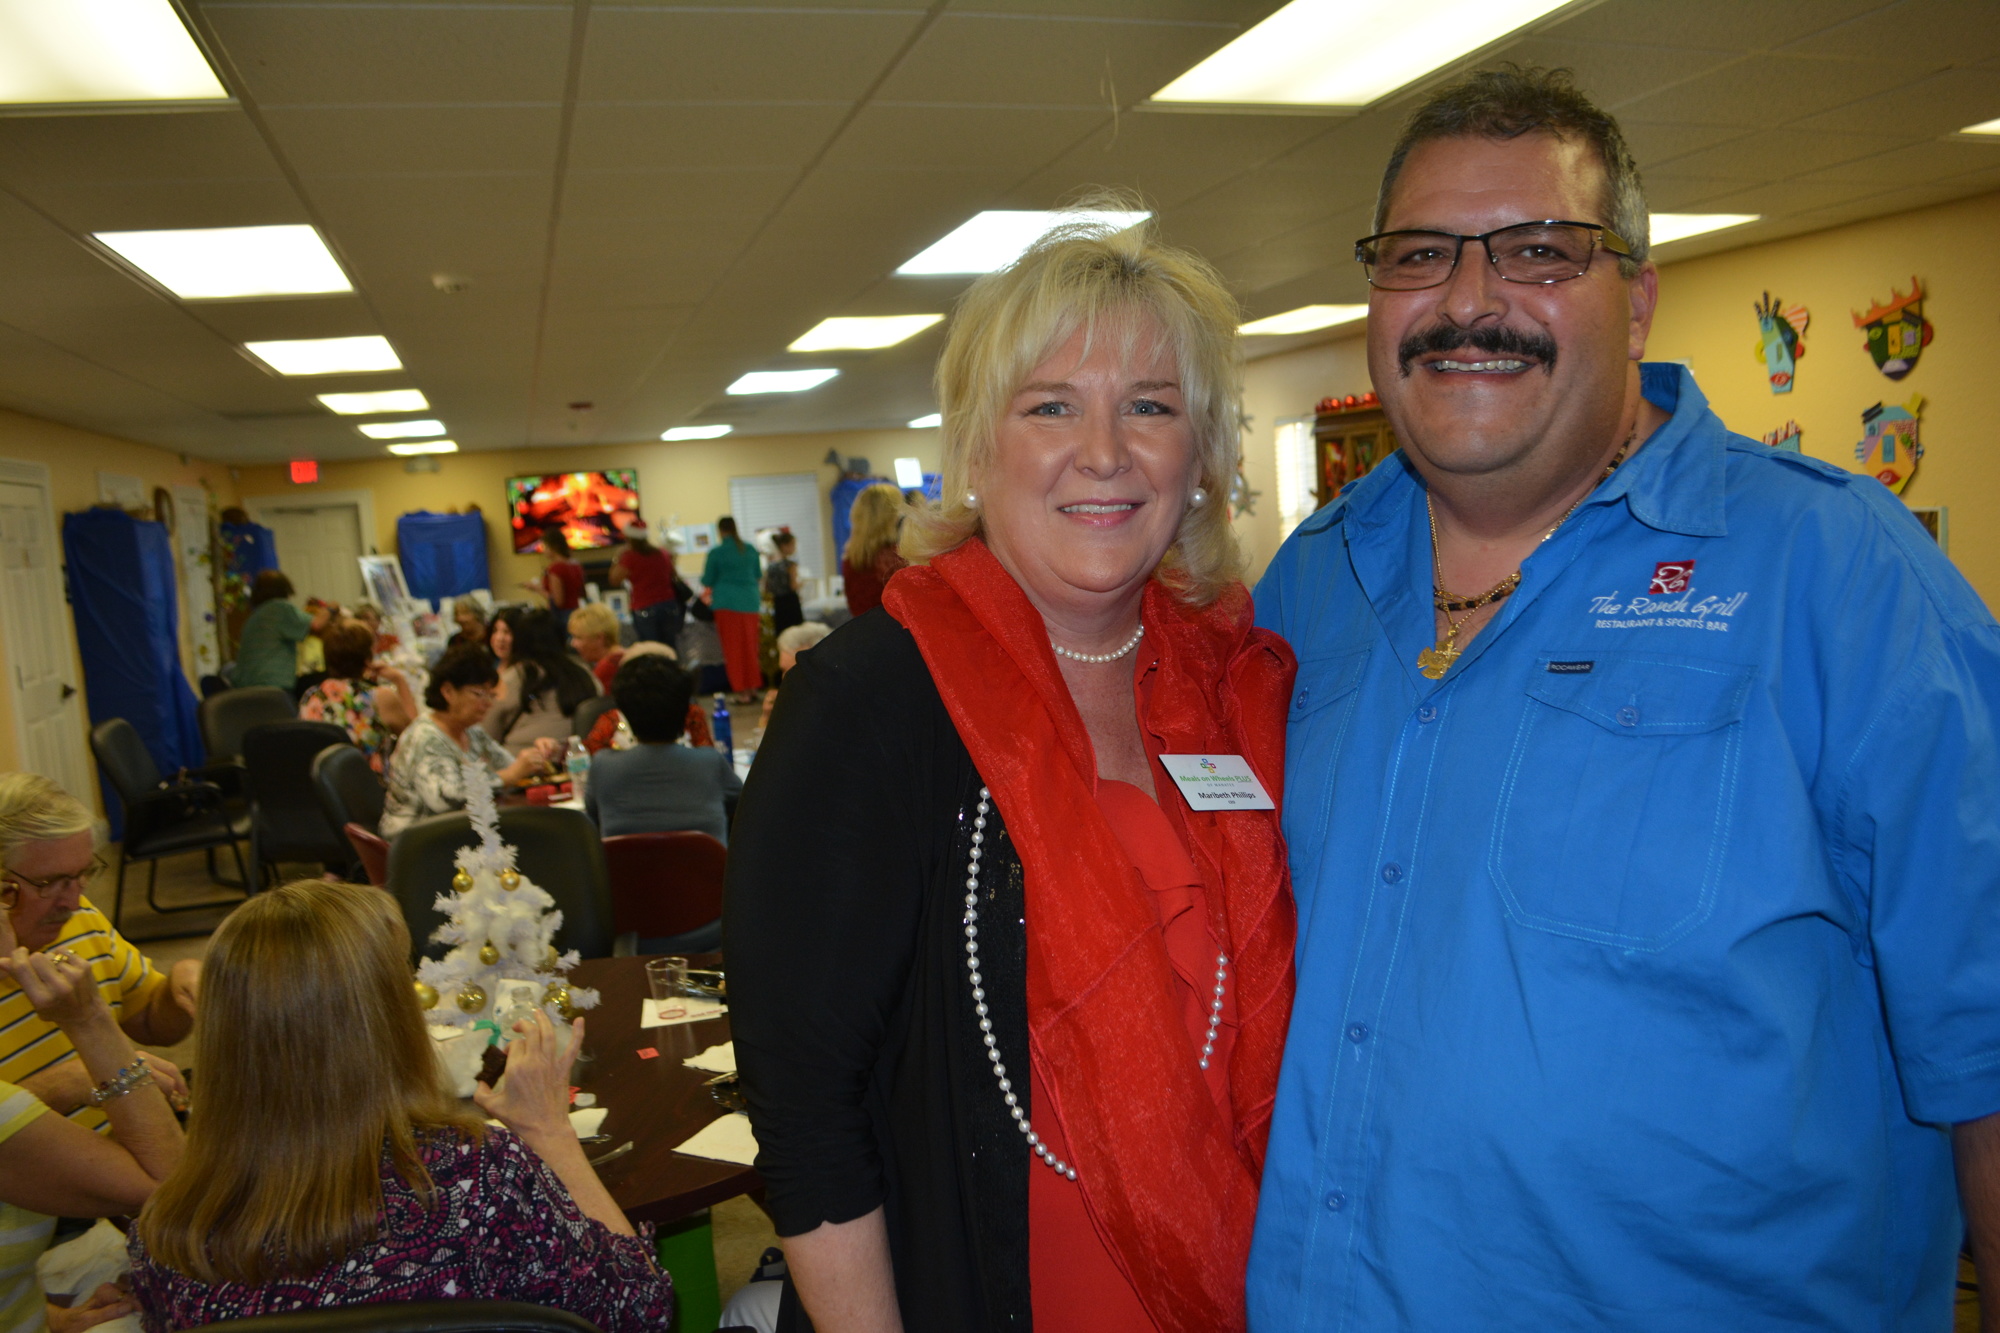 Meals on Wheels Plus CEO Maribeth Phillips and Ranch Grill owner Darrin Simone enjoy the Shoe Box Reception and Holiday Mart.